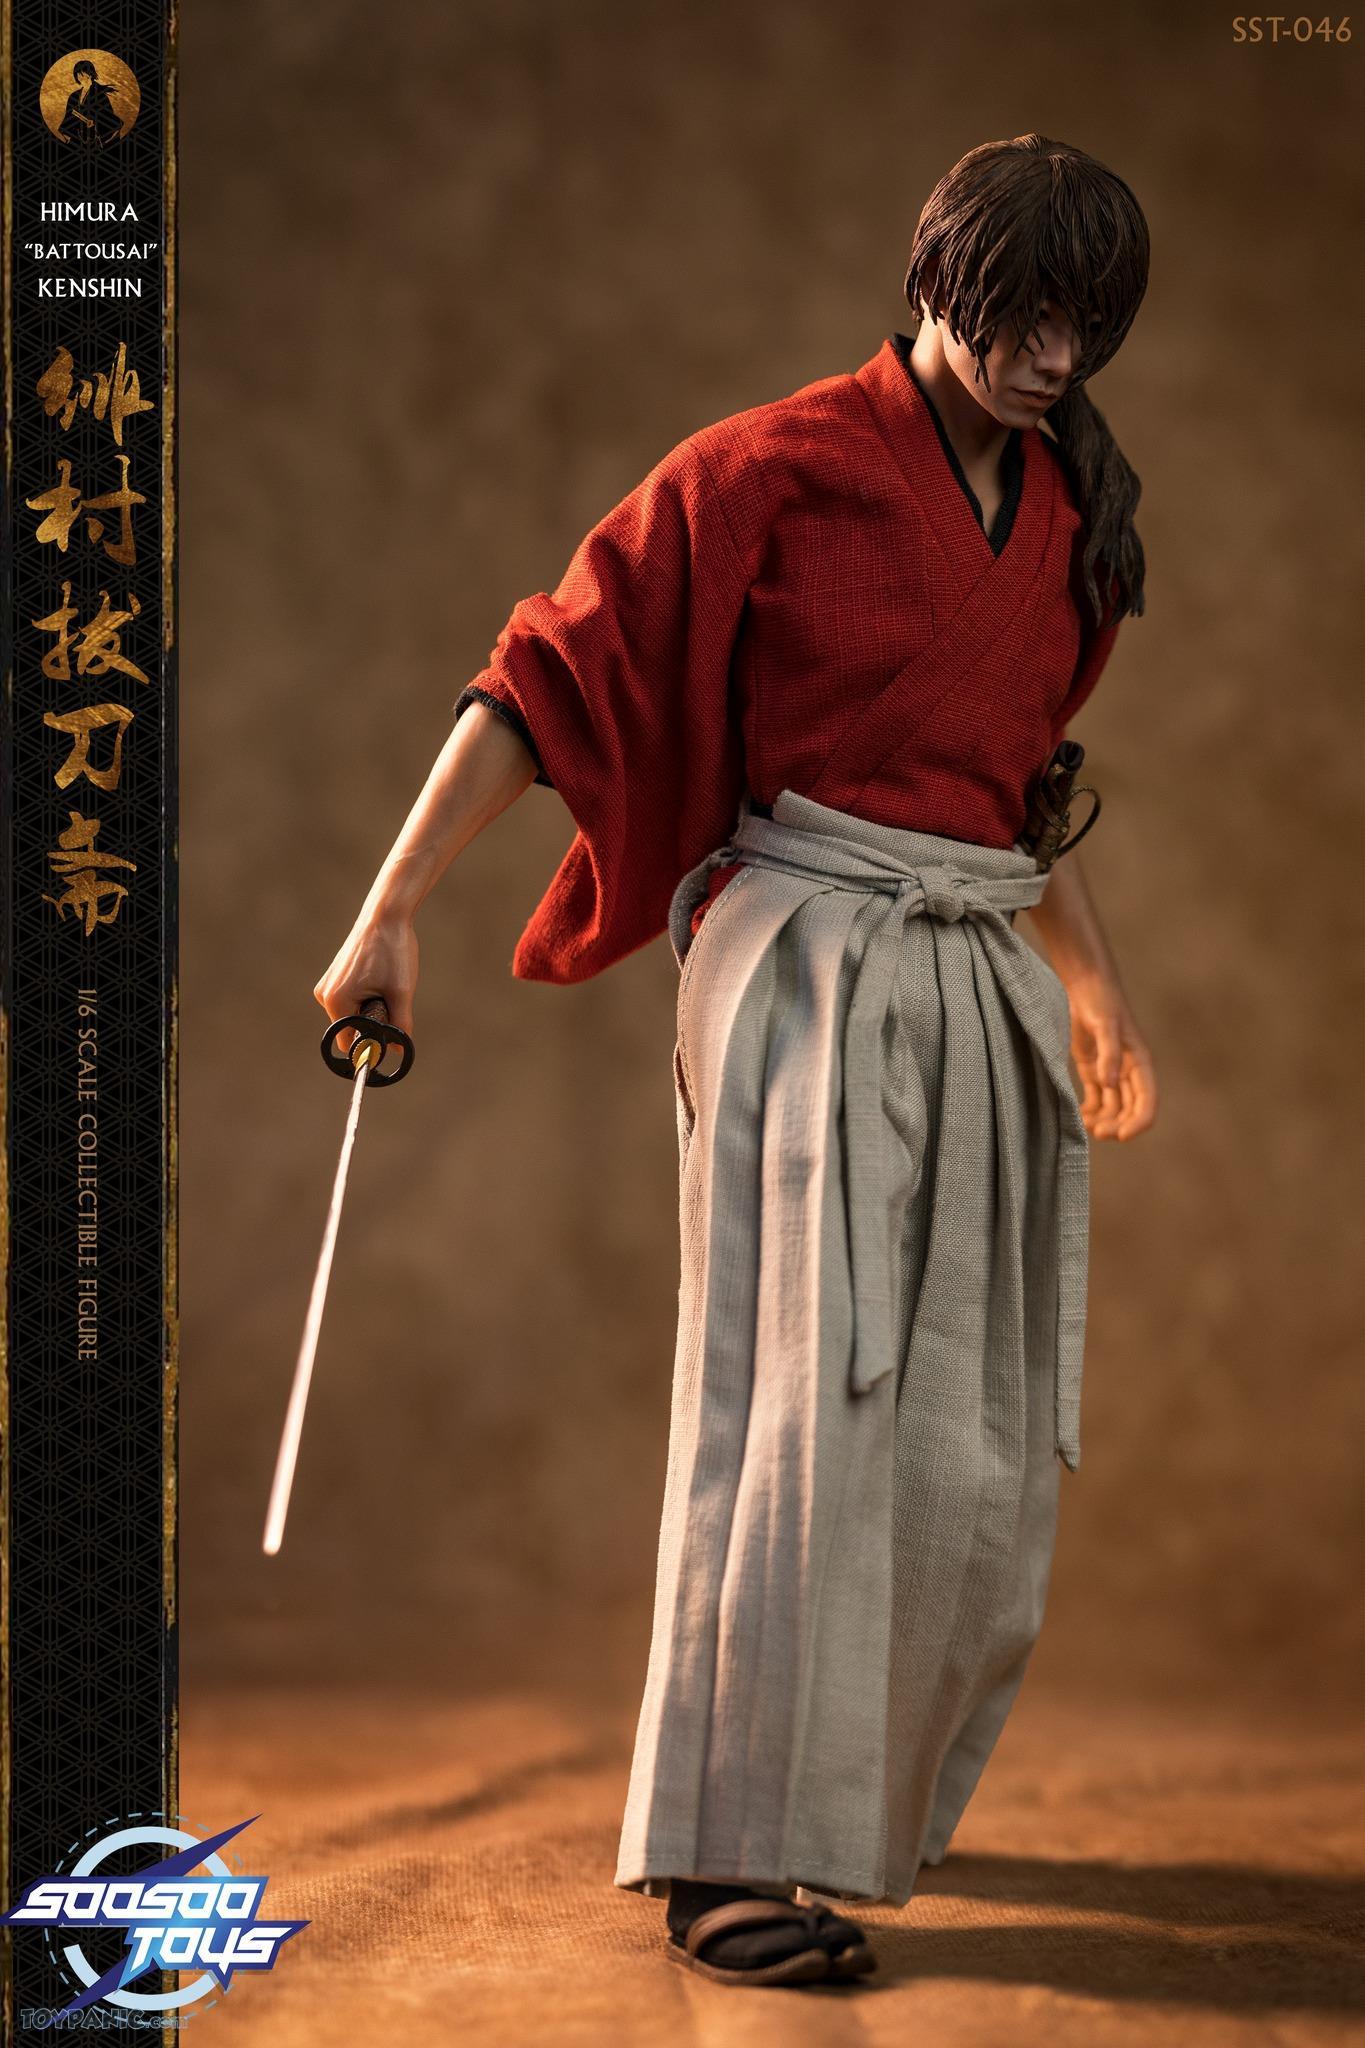 NEW PRODUCT: 1/6 scale Rurouni Kenshin Collectible Figure from SooSooToys 712202251231PM_223060